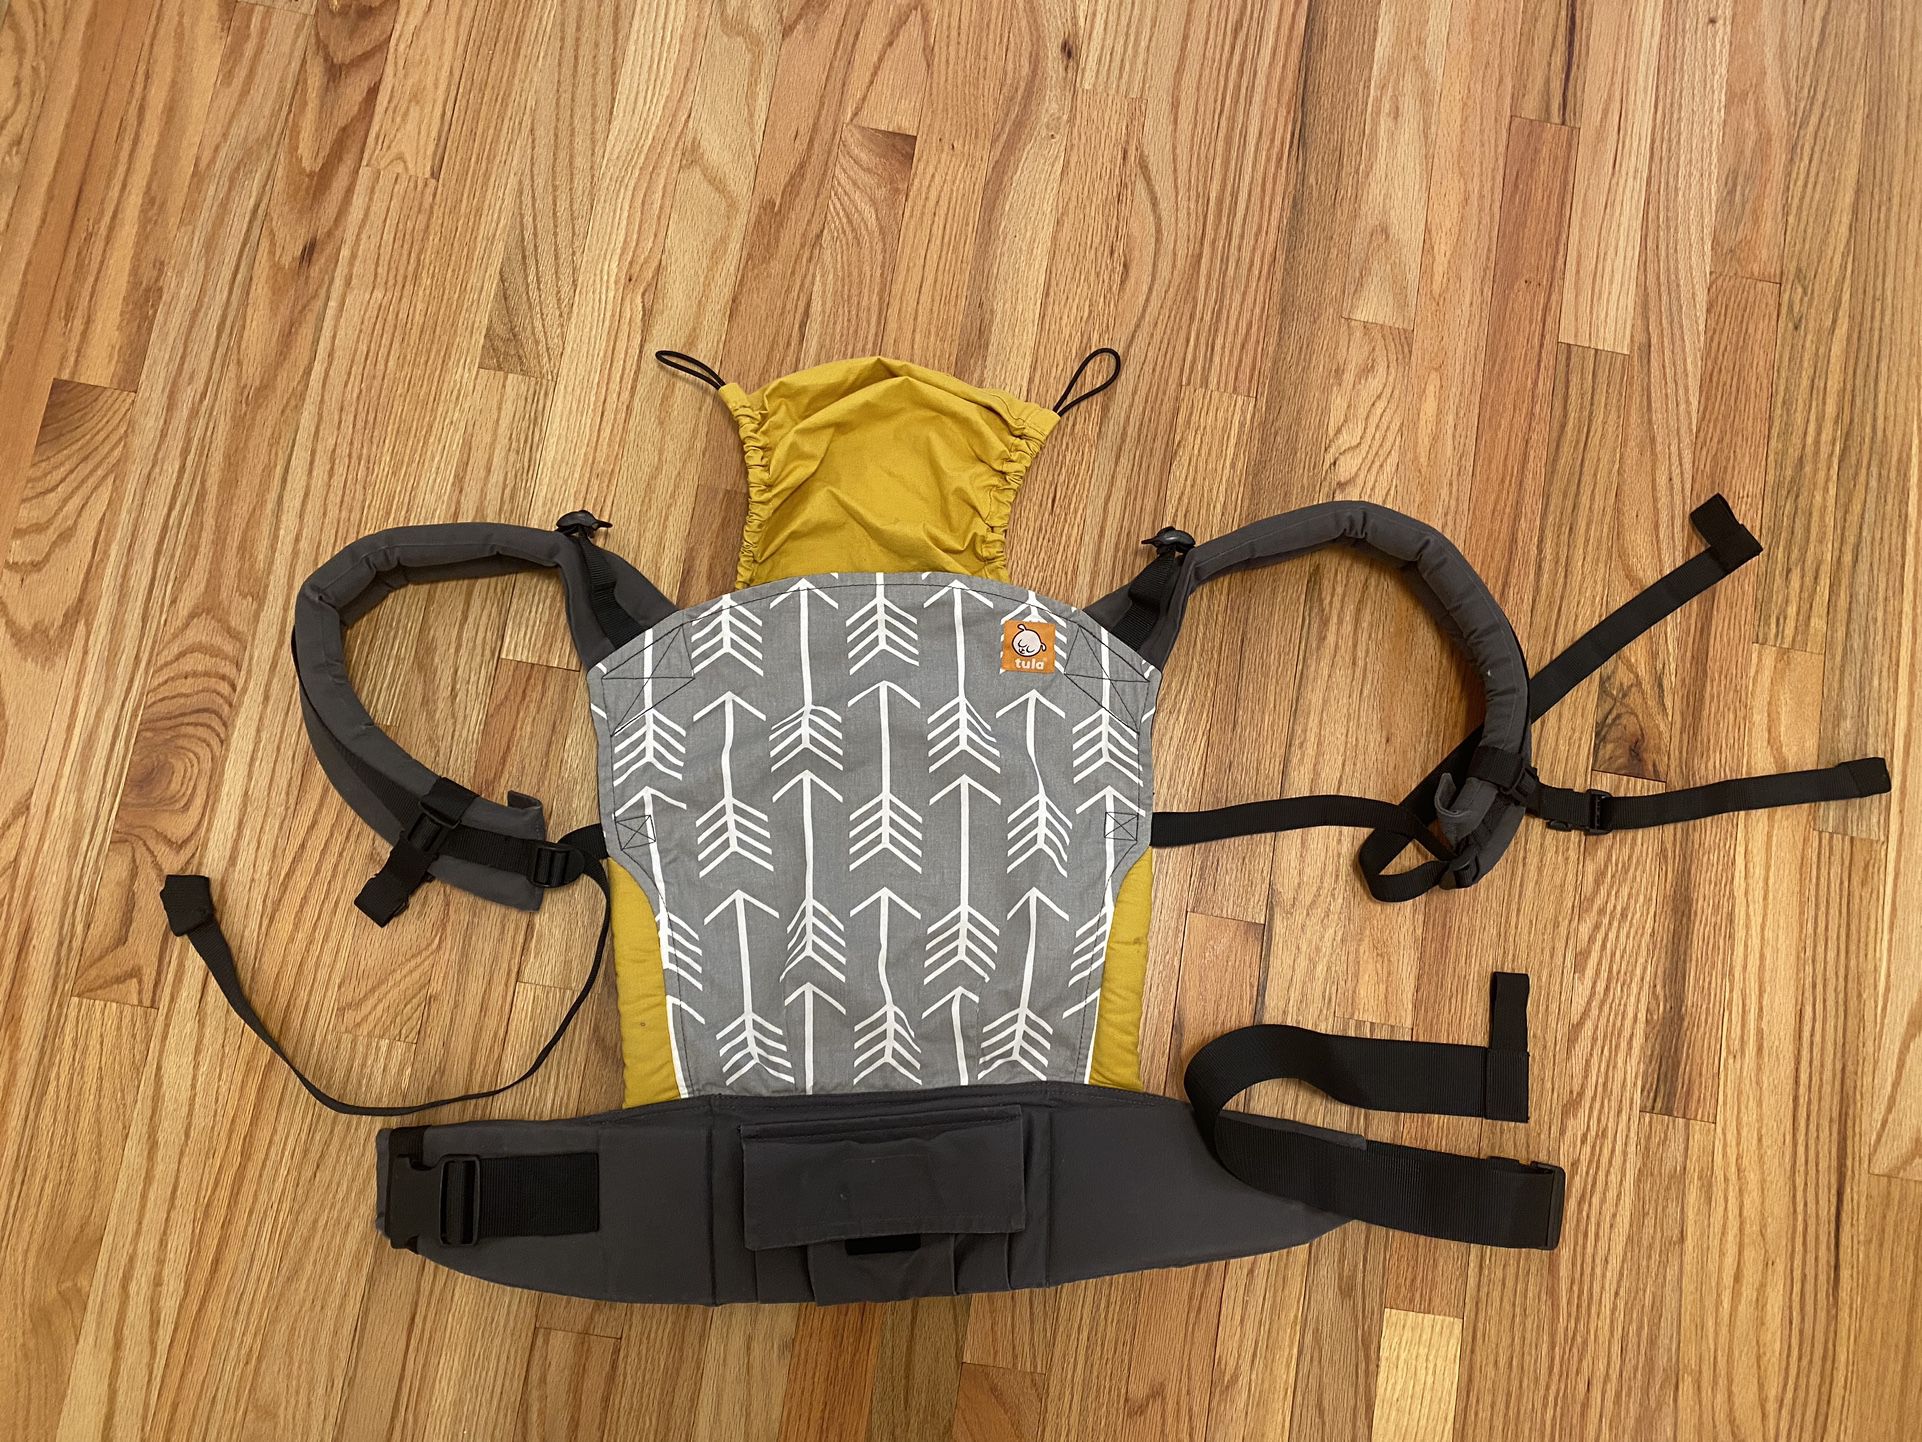 Tula Baby Carrier, Excellent Condition 